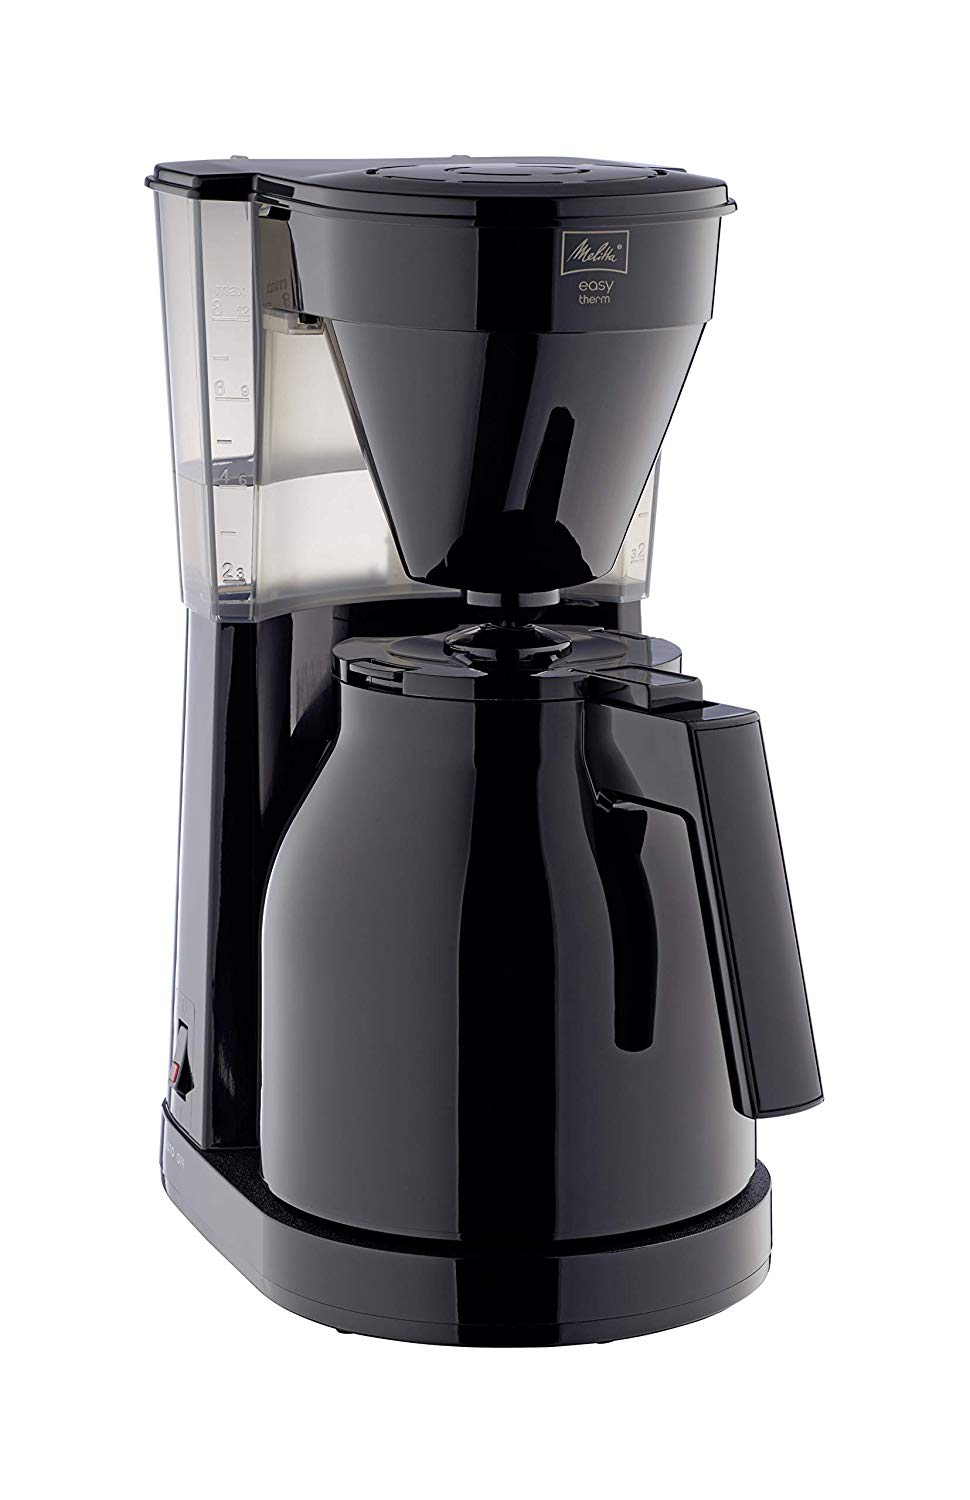 Melitta Easy Therm Filter Coffee Maker, Compact Design, Customisable